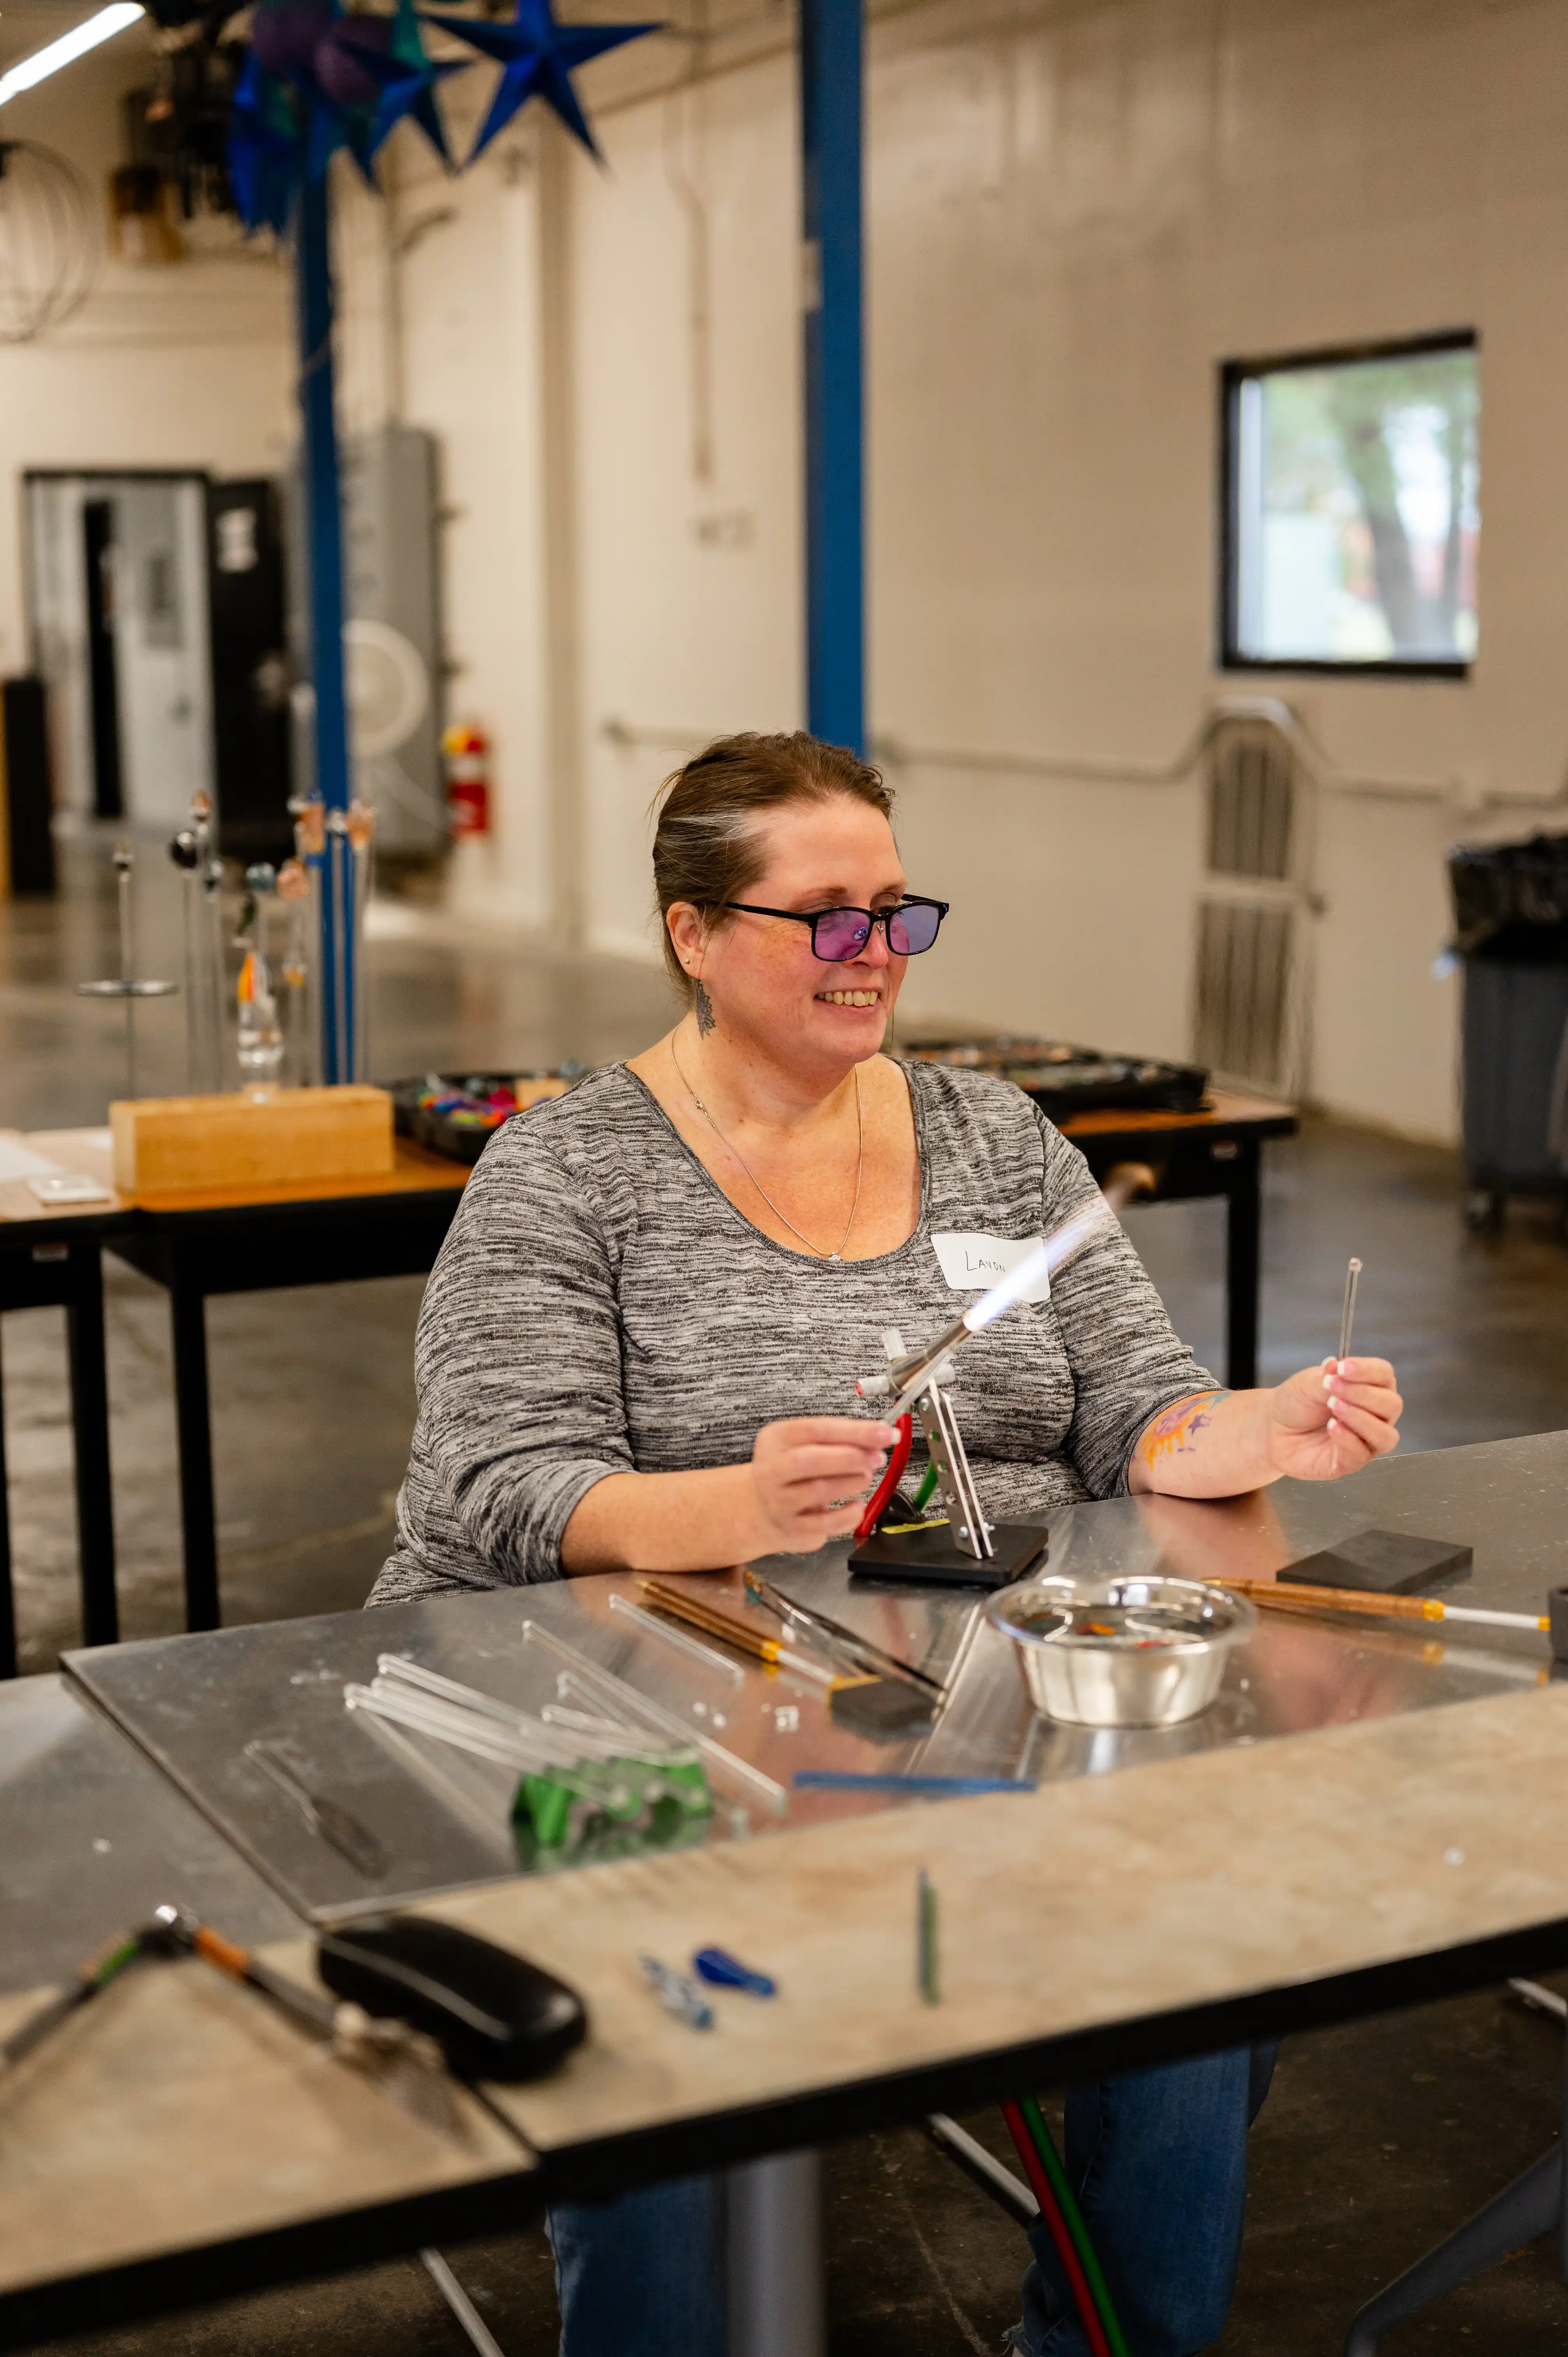 Woman smiling while working with glass rods at a workbench in a workshop setting.